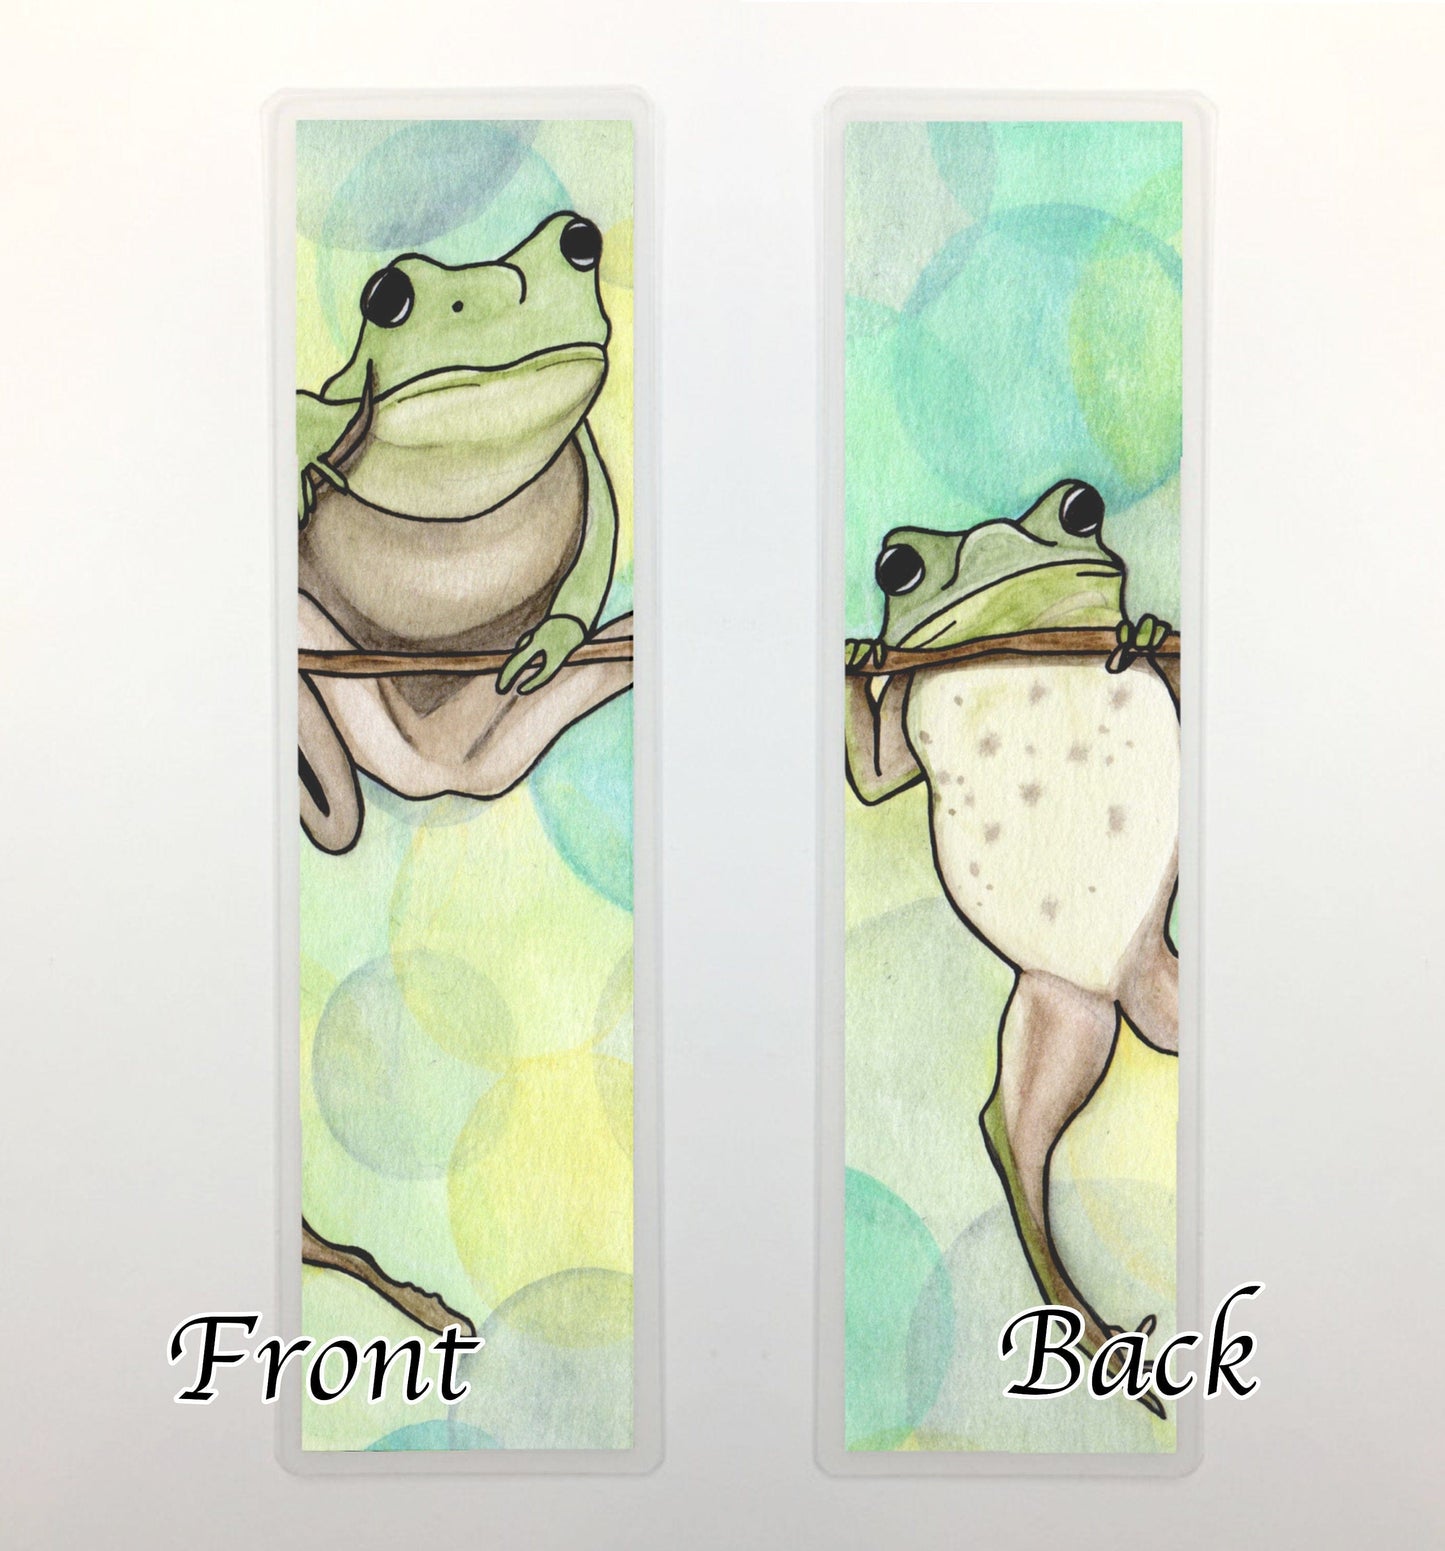 PinkPolish Design Bookmarks "Hanging Out" 2-Sided Bookmark